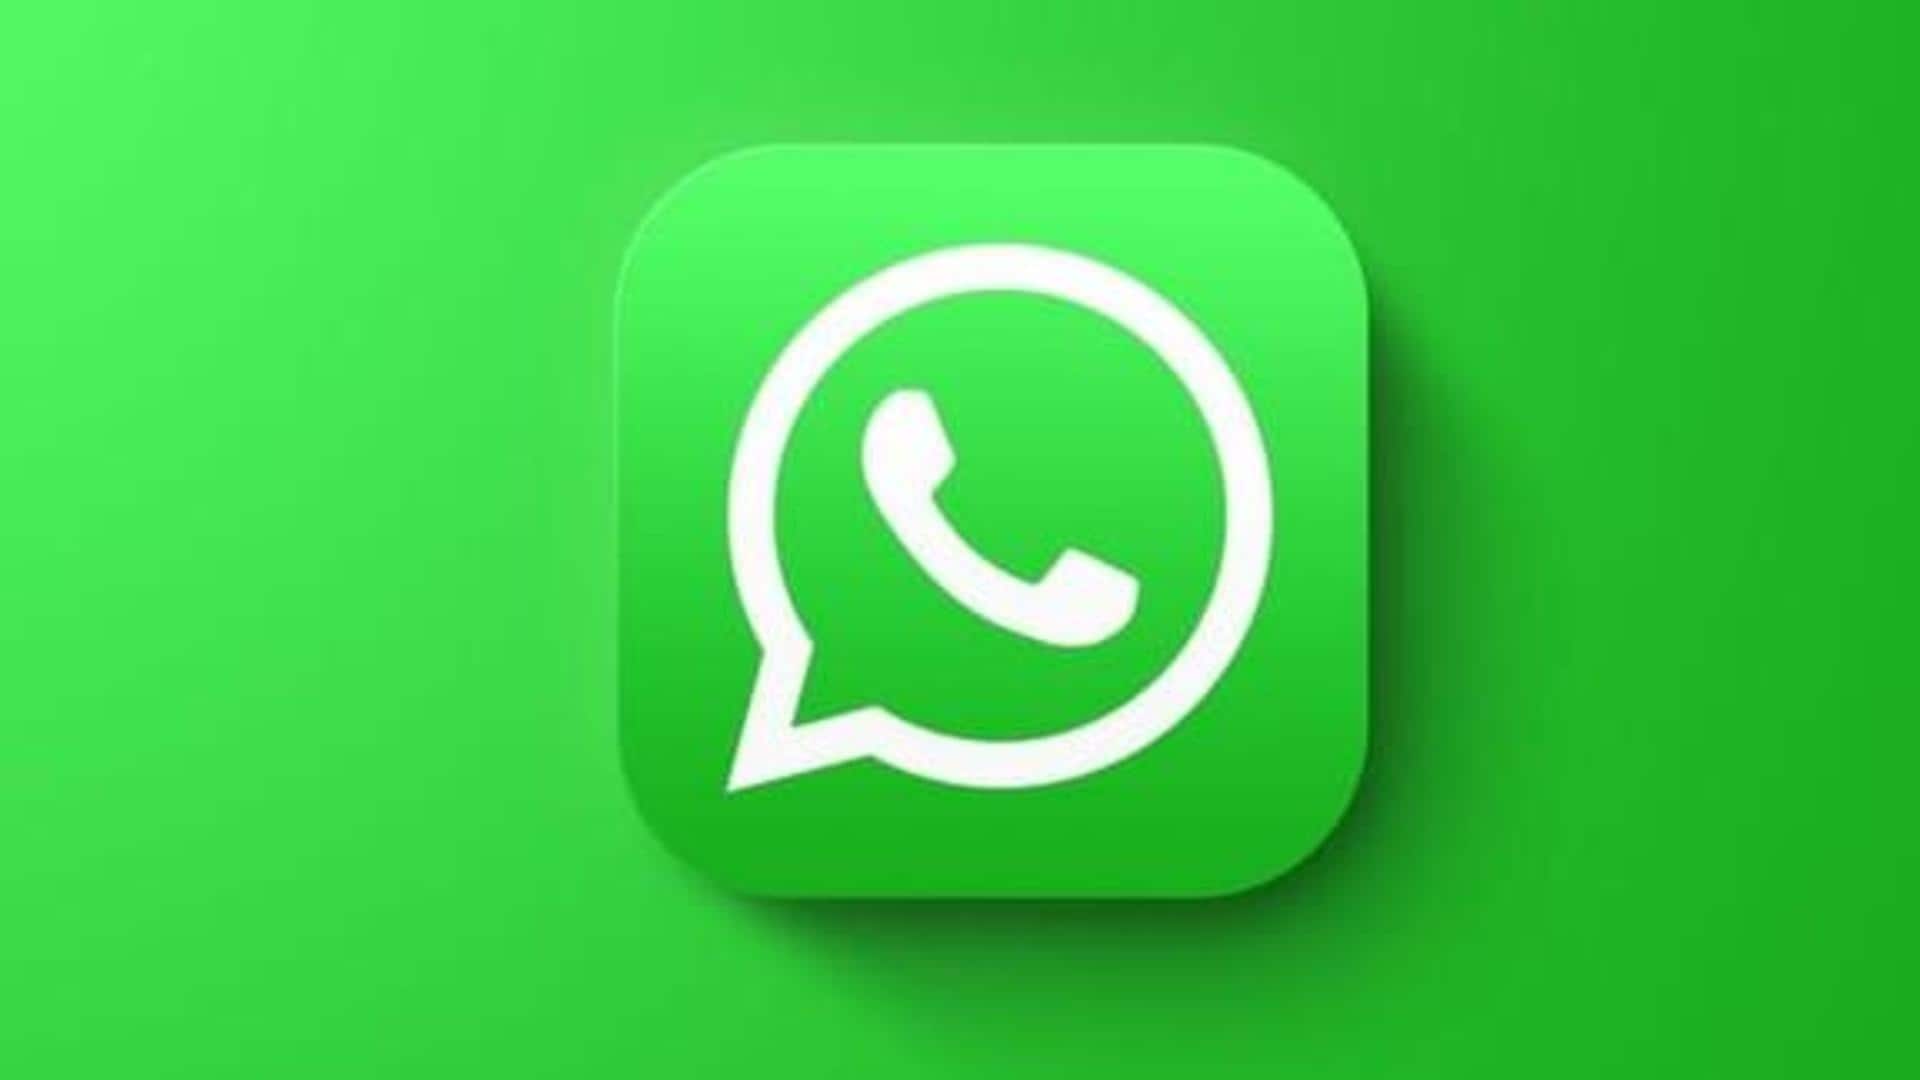 WhatsApp could soon bring these features to Android and iOS